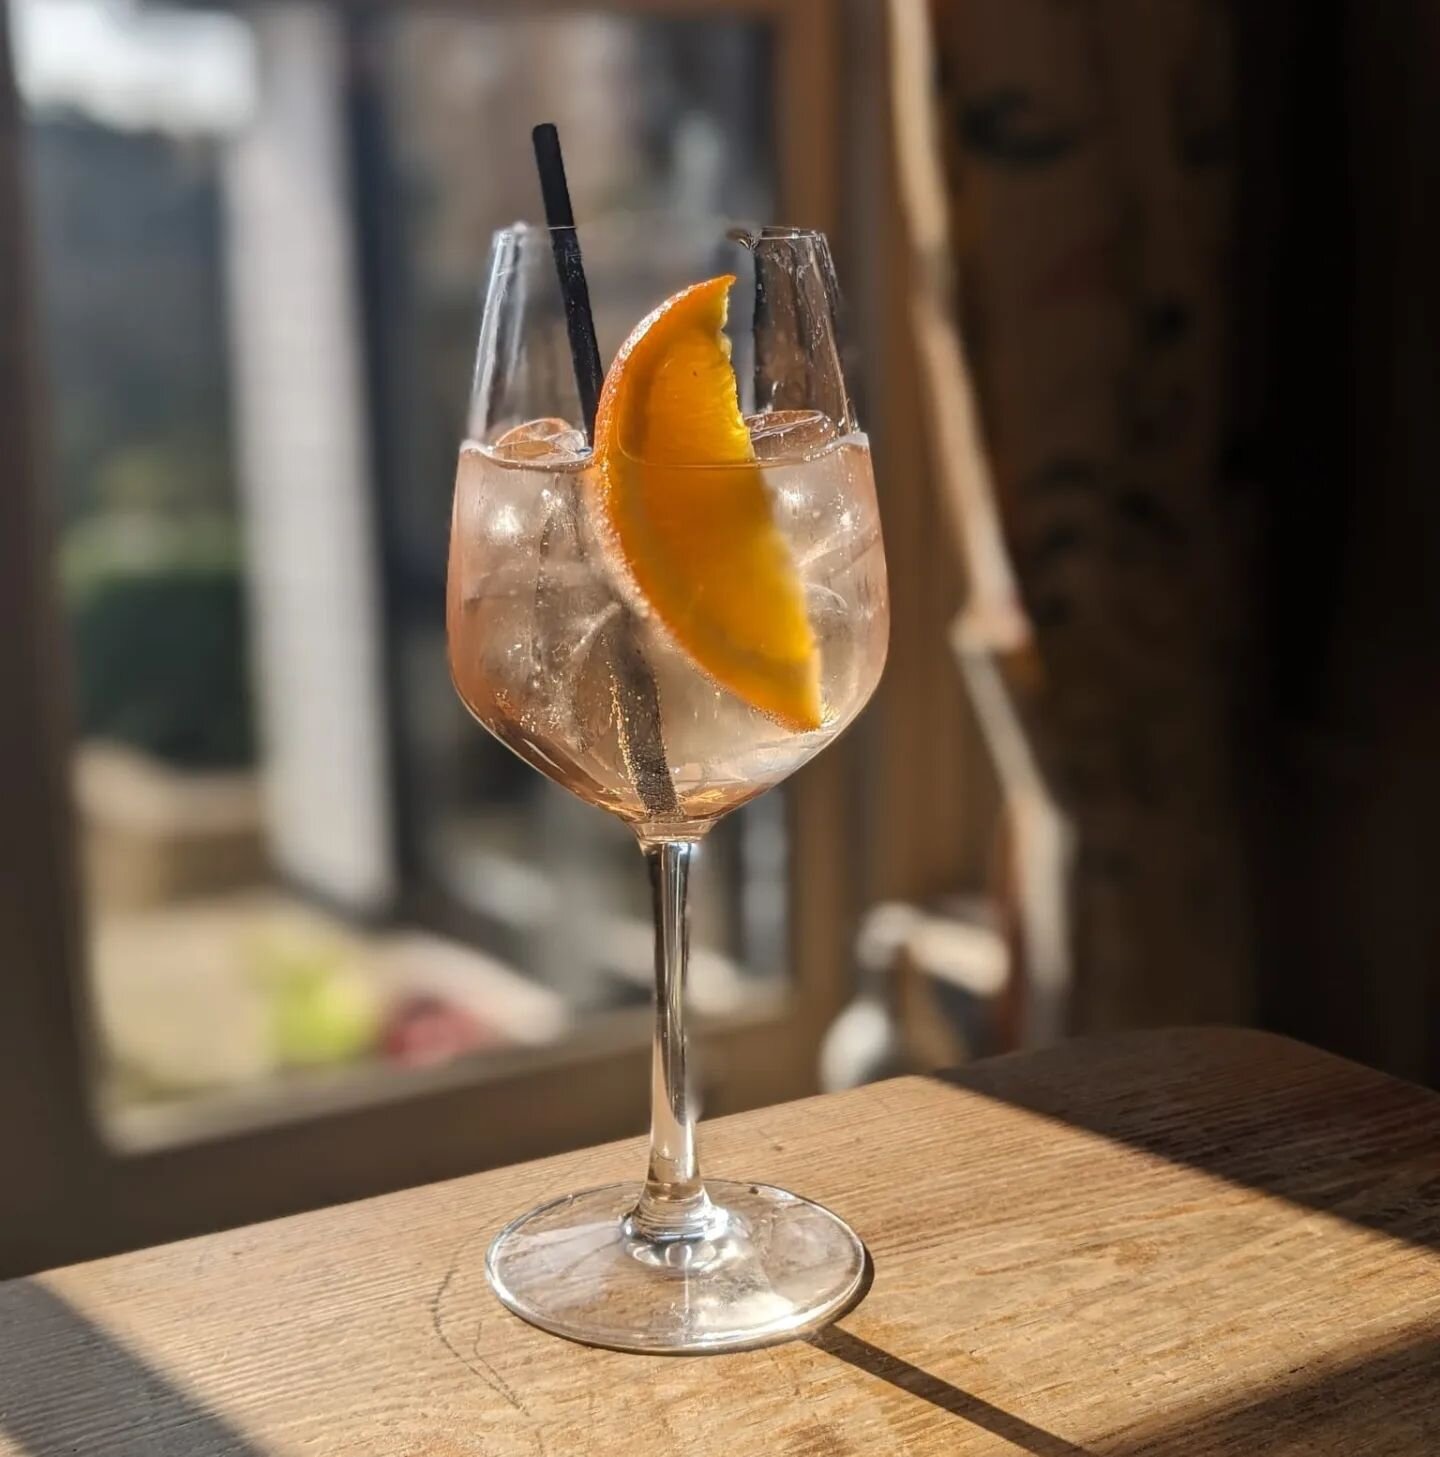 A Rhubarb and Elderflower Spritz &amp; one for the six nations!

The Rhubarb Spritz is made with a touch of Ros&eacute; Bocco to give it a super refreshing and clean finish. We are looking forward to this one evolving as the seasons go on.

(Only the